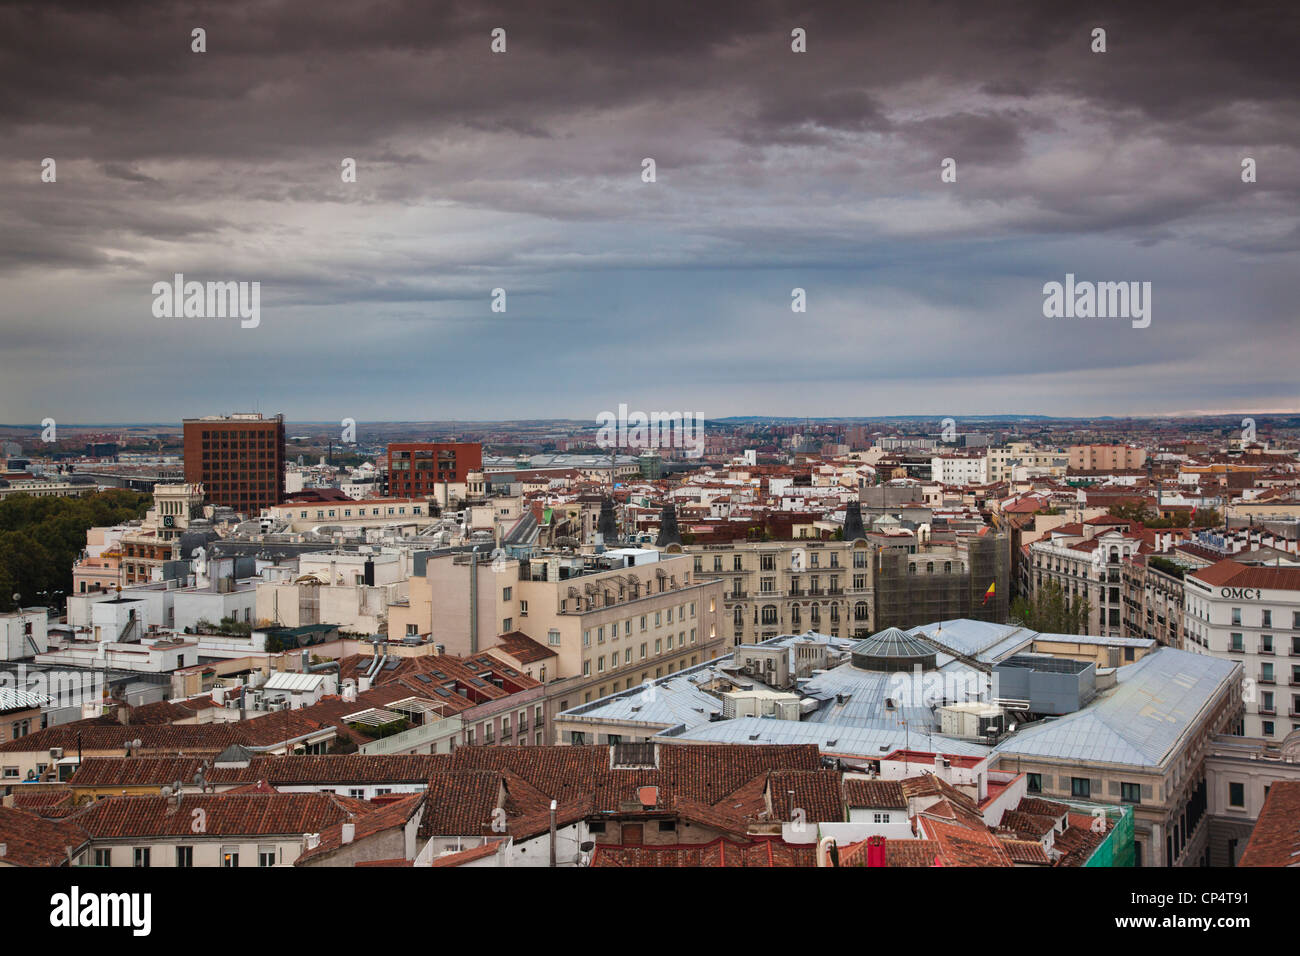 Spain, Madrid, elevated city view from the  Circulo de Bellas Artes, sunset Stock Photo